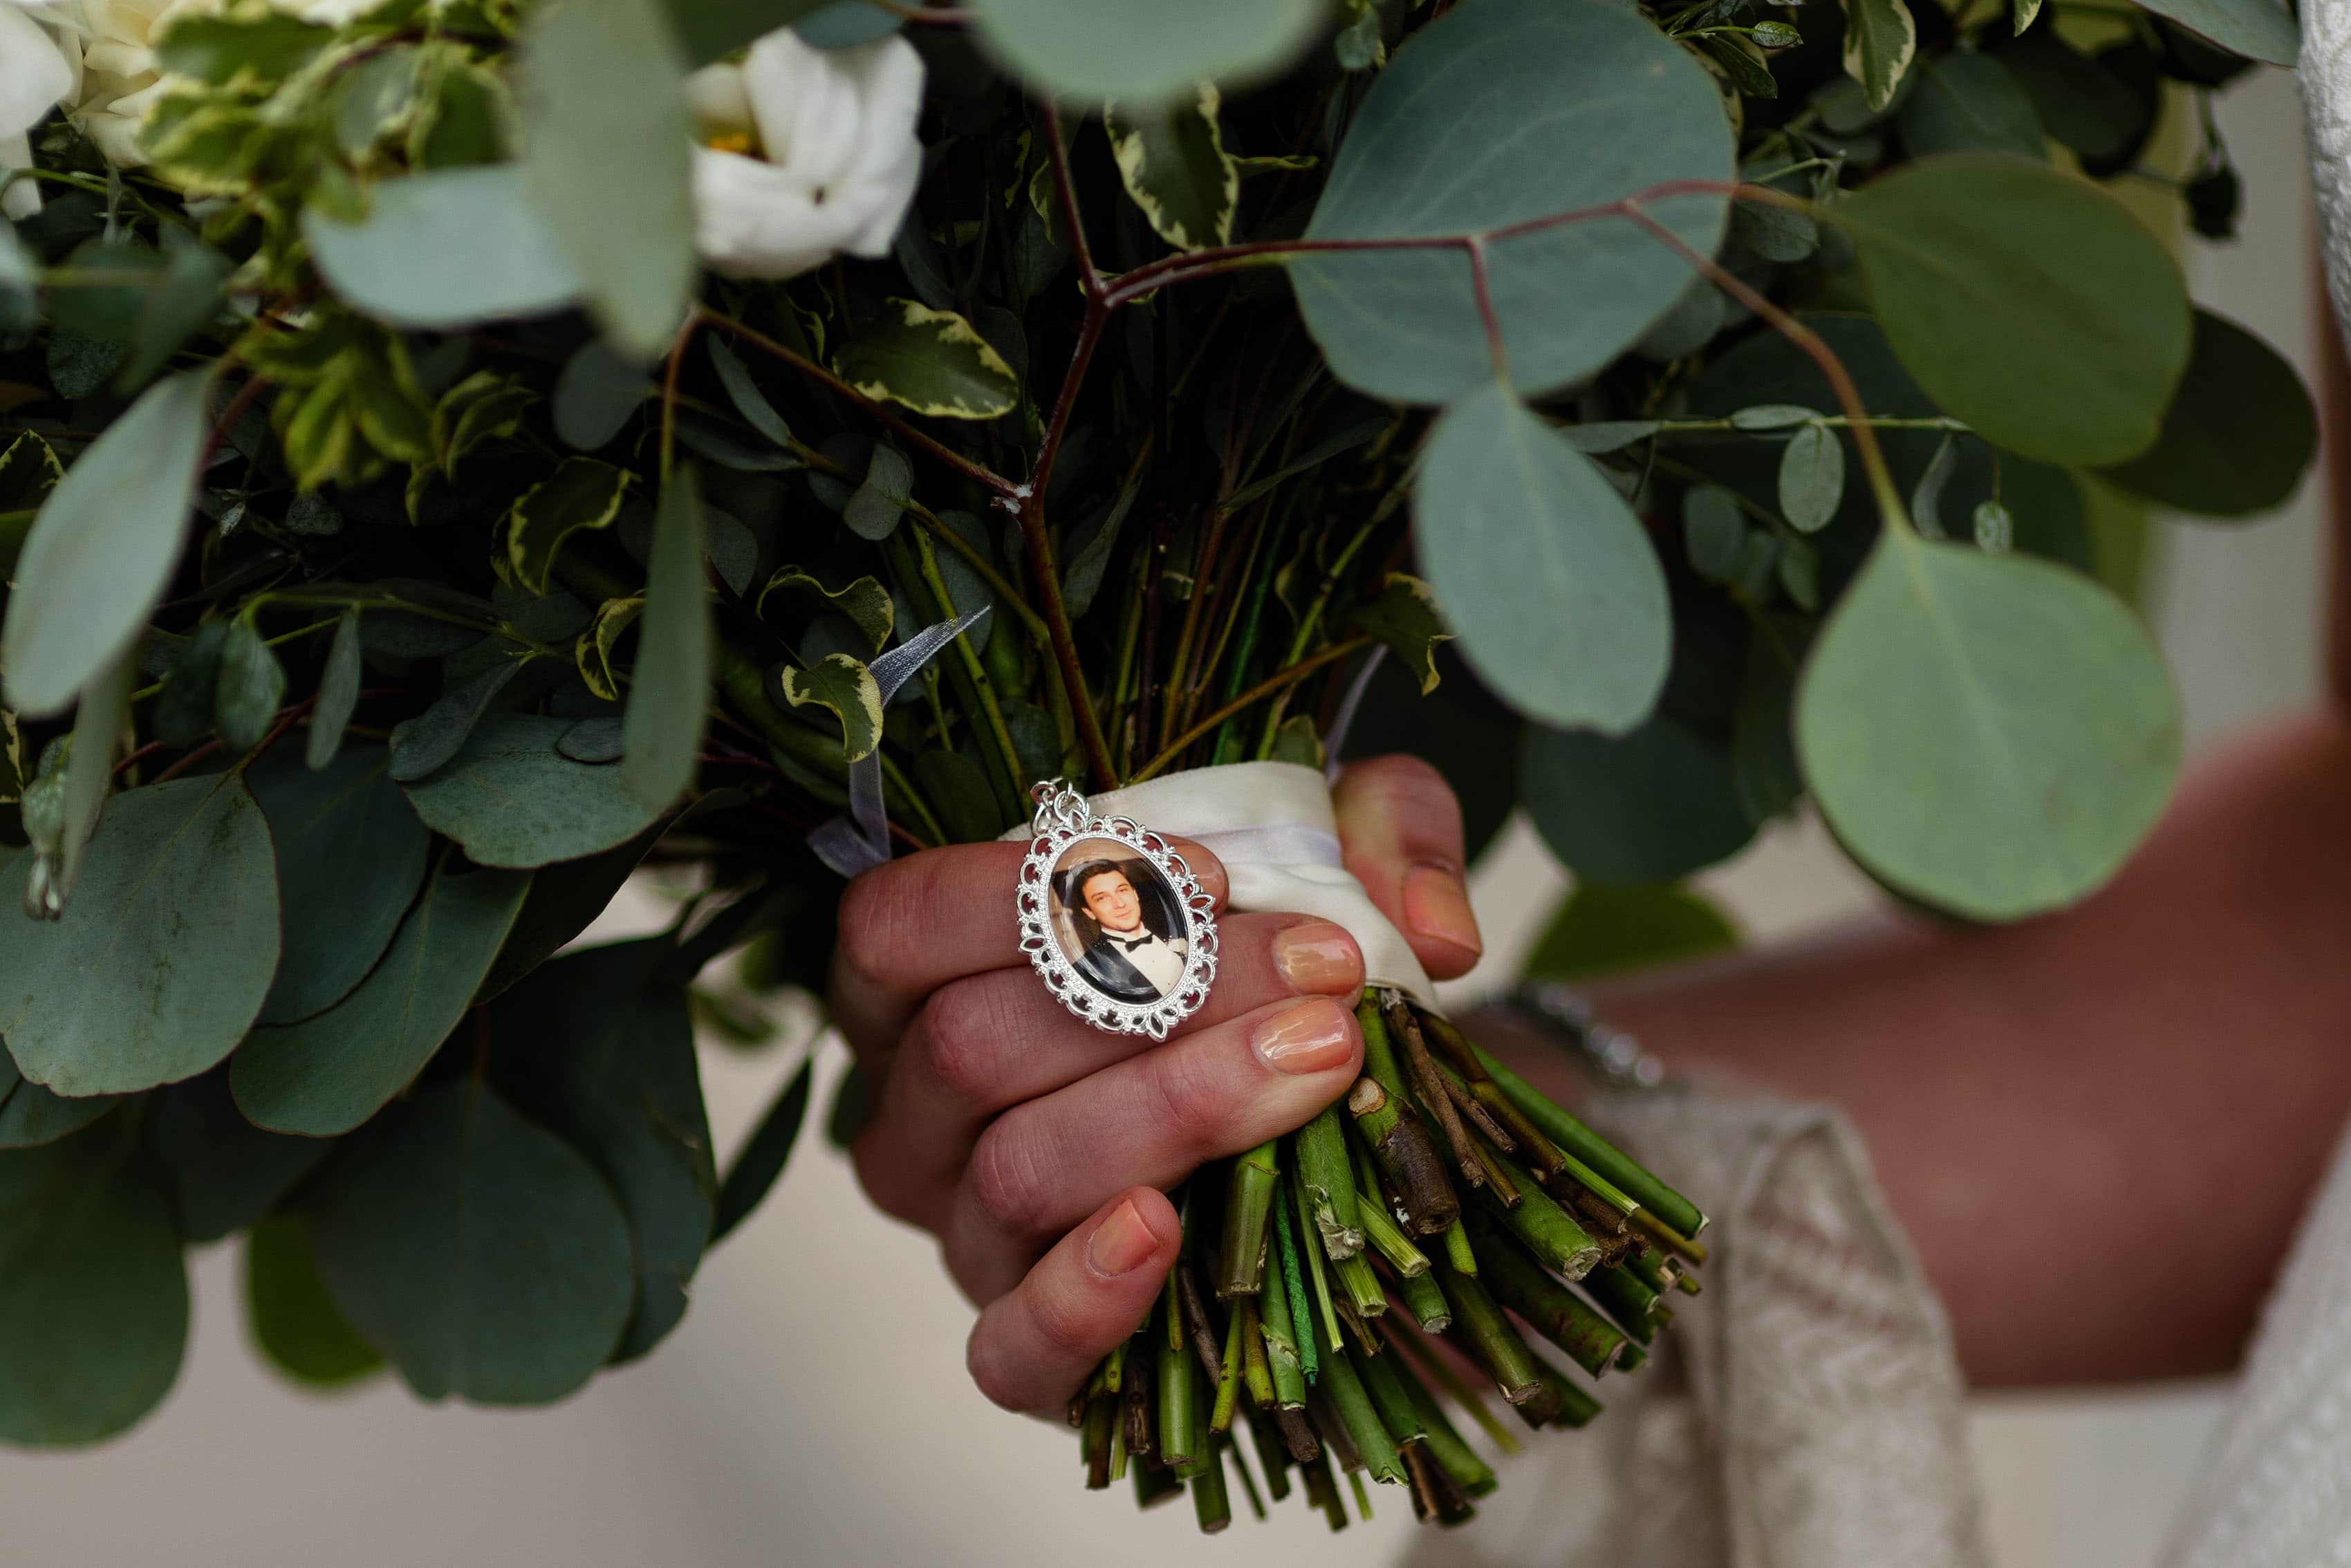 A detail of the bride’s father in a locket on her bouquet